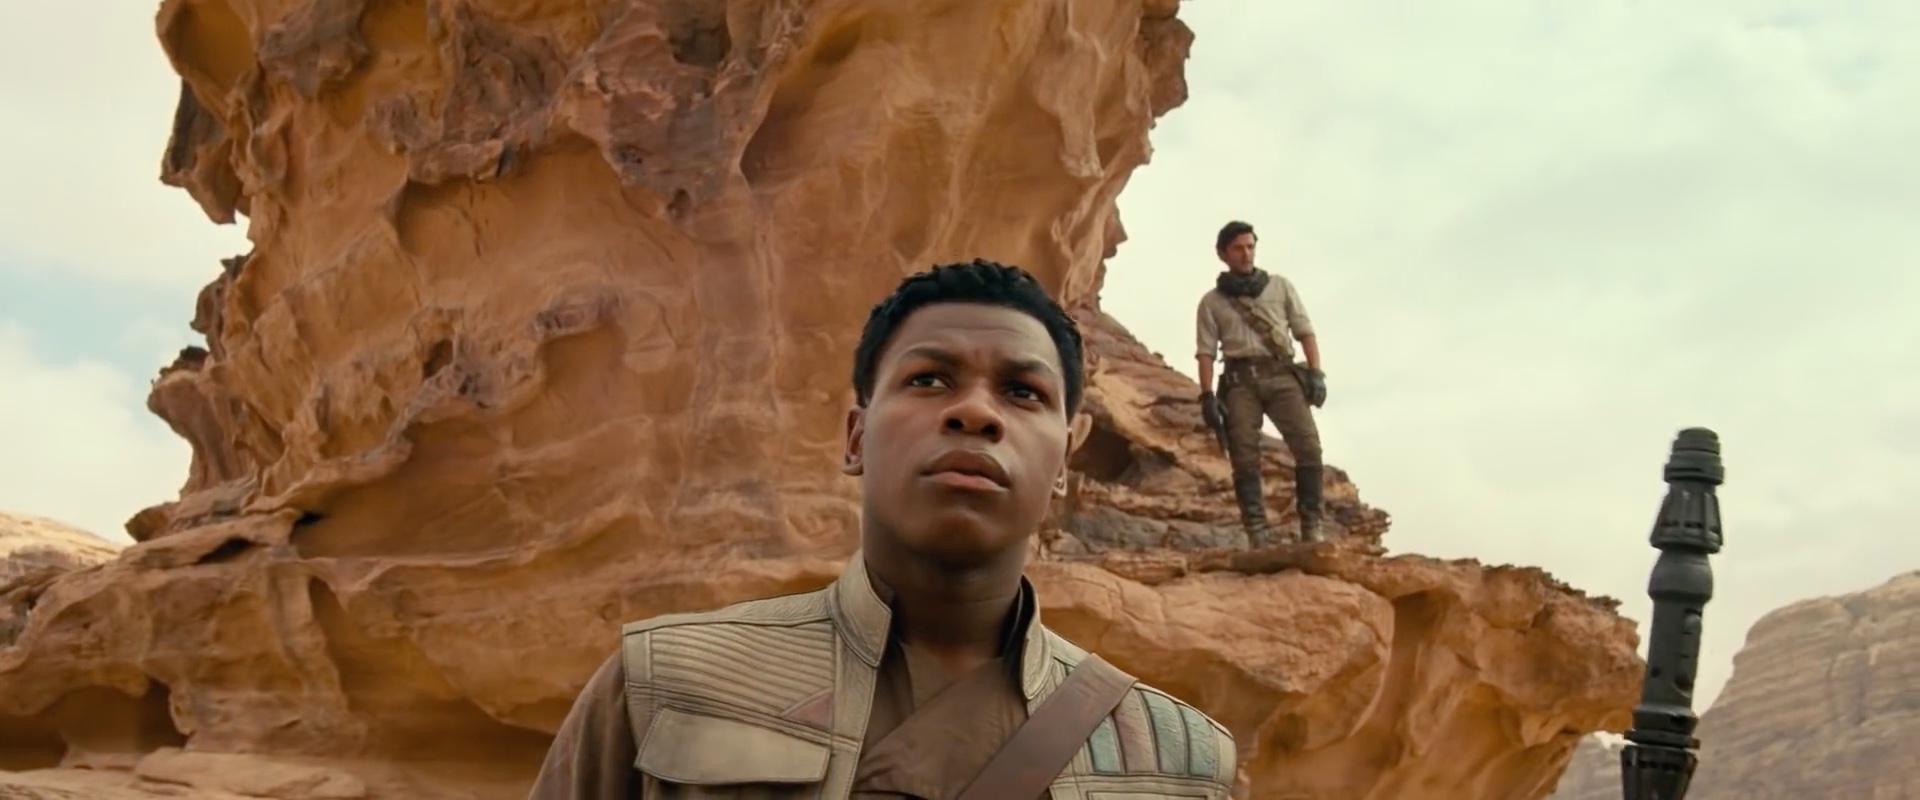 Poe and Finn hangin out on some rocks in the desert